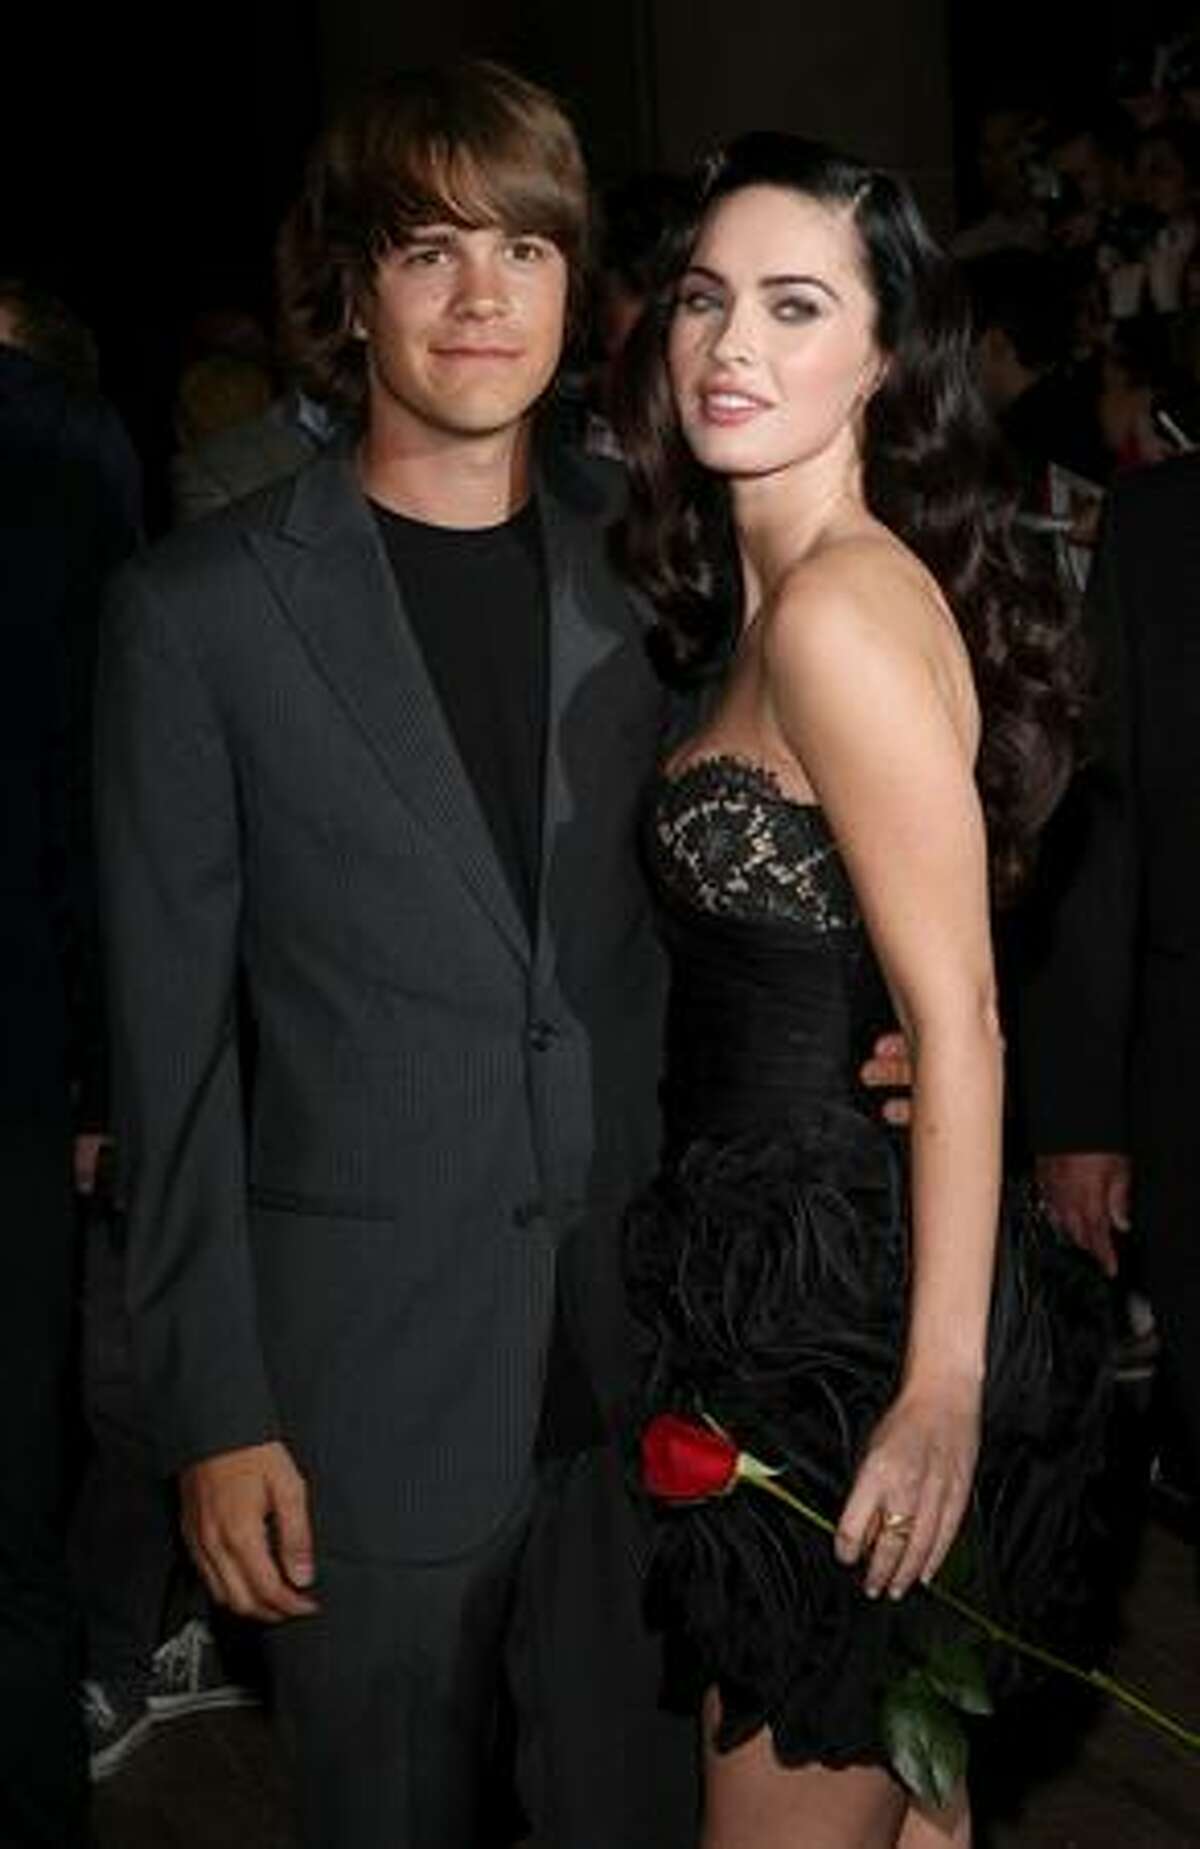 Actor Johnny Simmons (L) and actress Megan Fox arrive at the Toronto International Film Festival Midnight Madness screening "Jennifer's Body" held at the Ryerson Theatre on September 10, 2009 in Toronto, Canada.